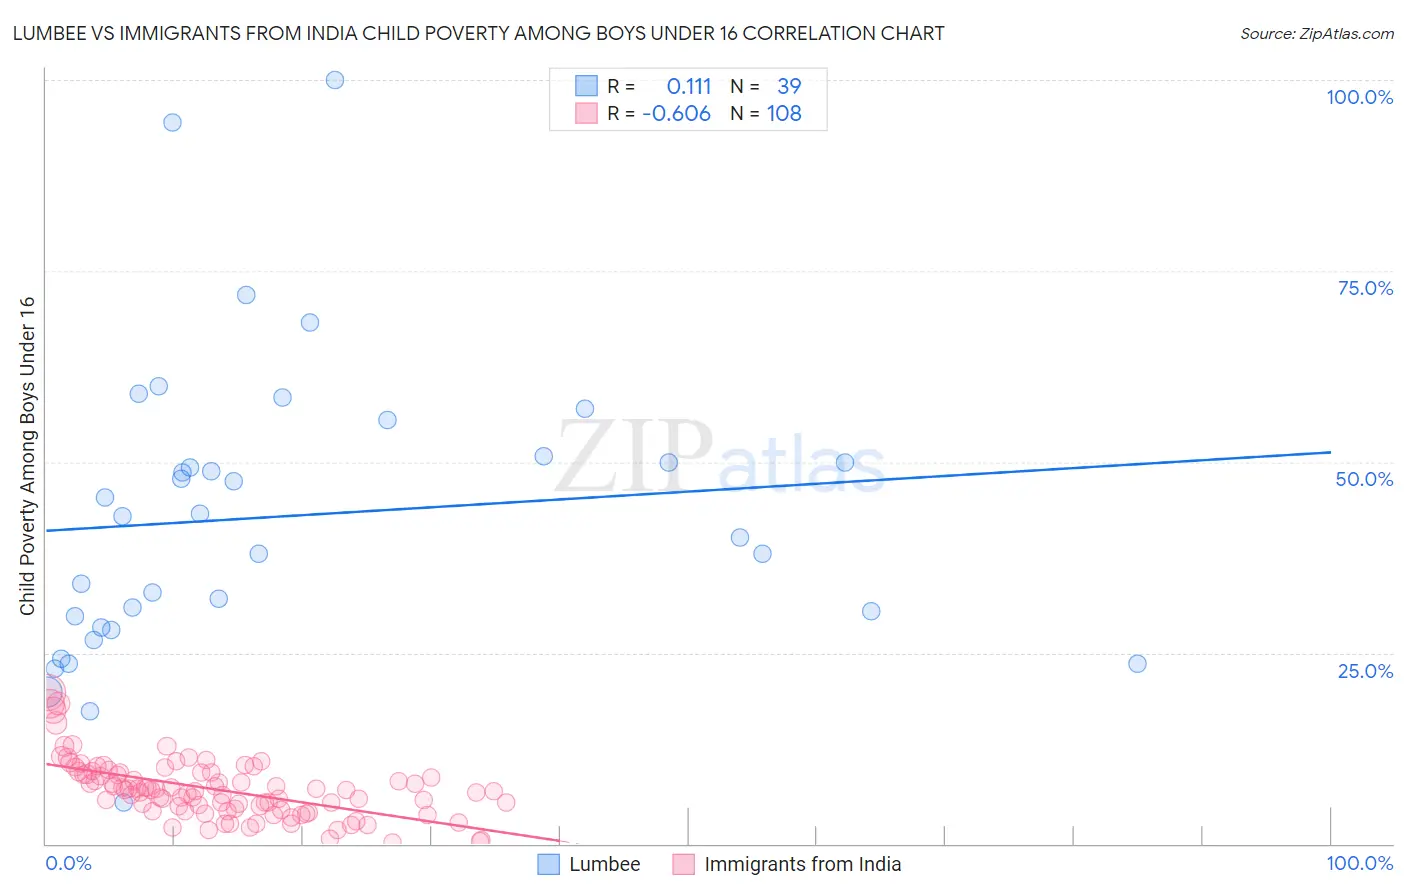 Lumbee vs Immigrants from India Child Poverty Among Boys Under 16